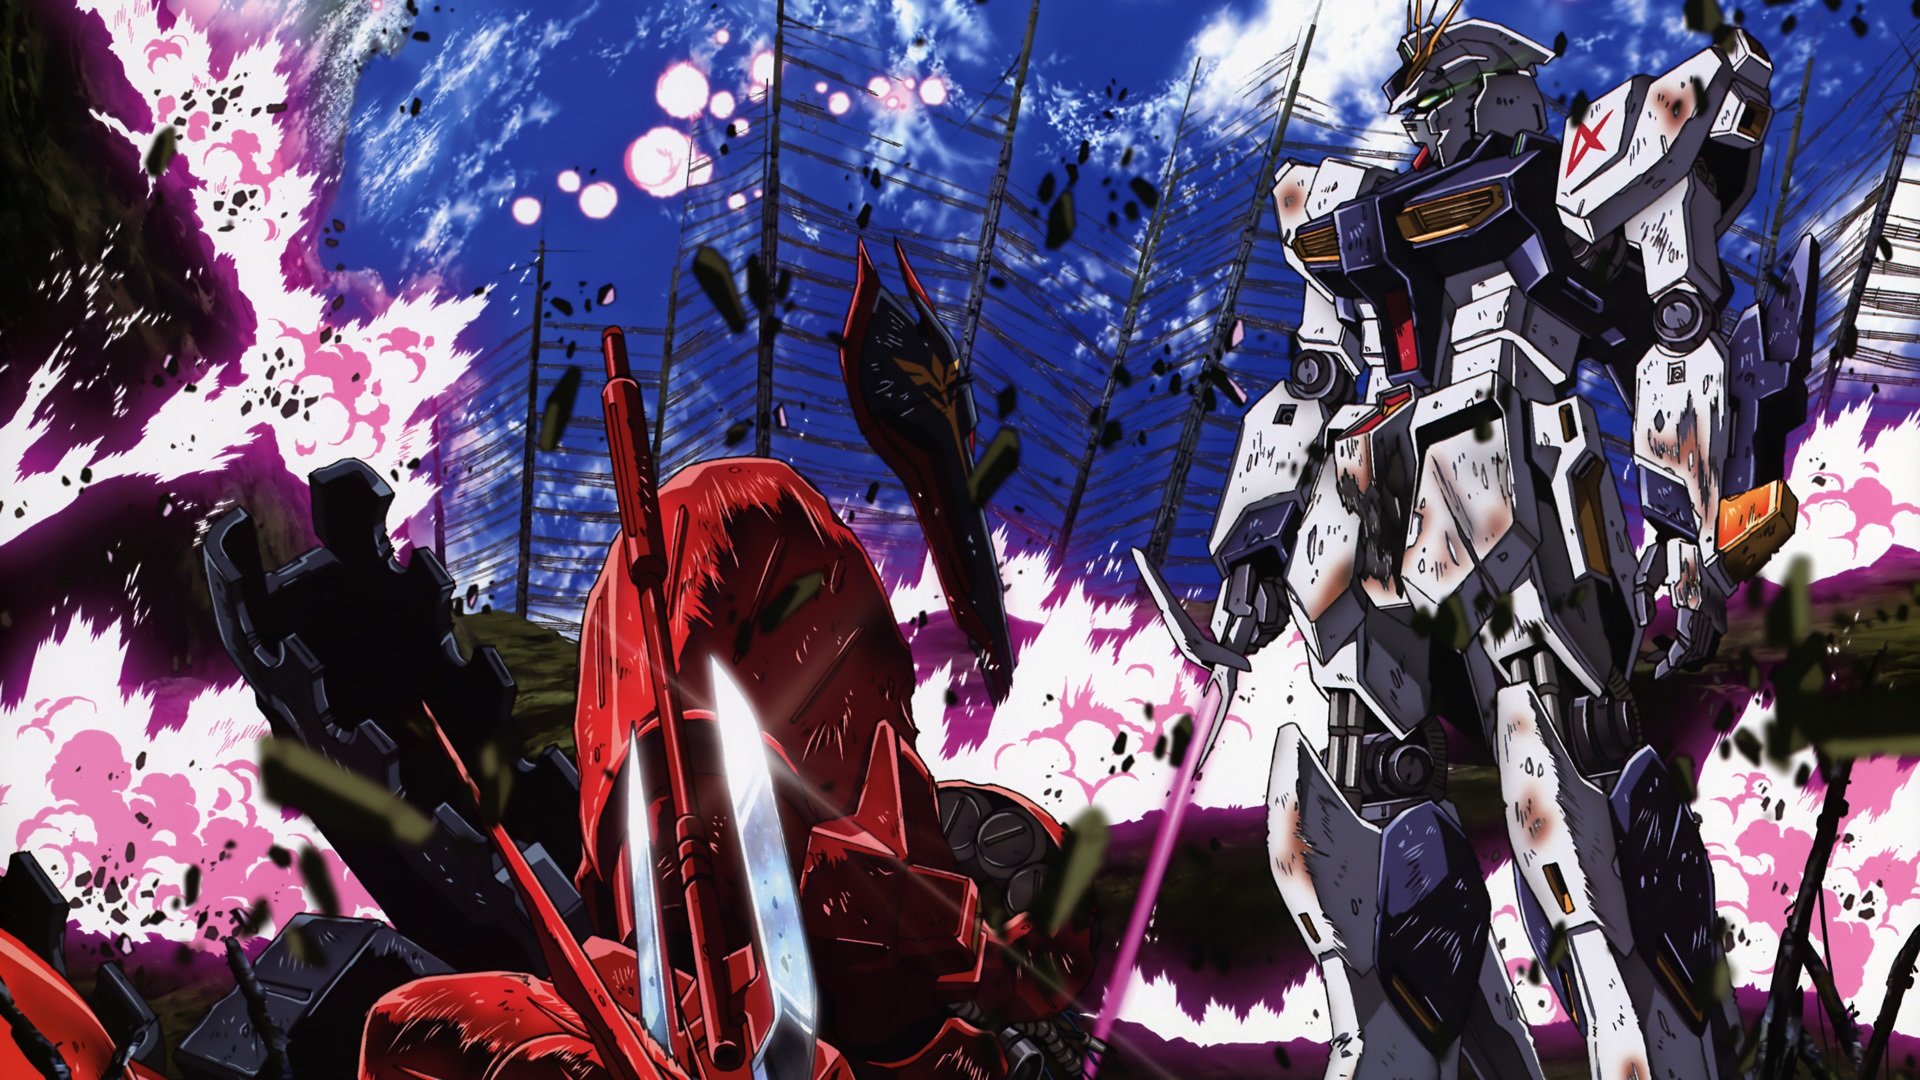 Download full hd 1920x1080 Gundam PC background ID:115129 for free